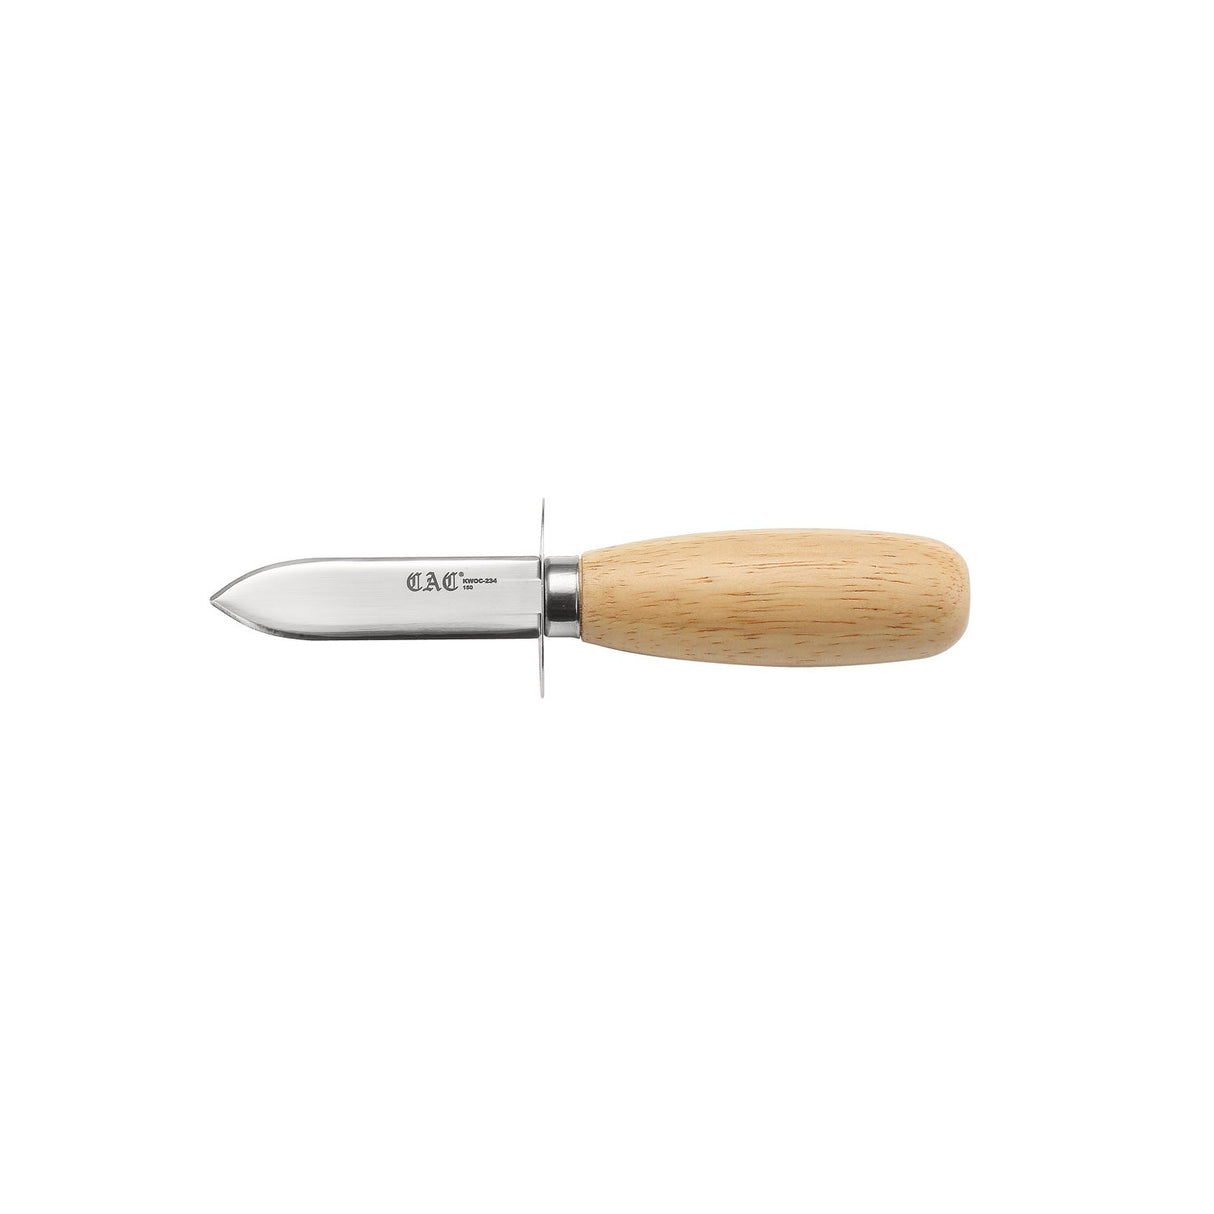 Knife Oyster/Clam Pointed Tip Wood Hdl 2-3/4"